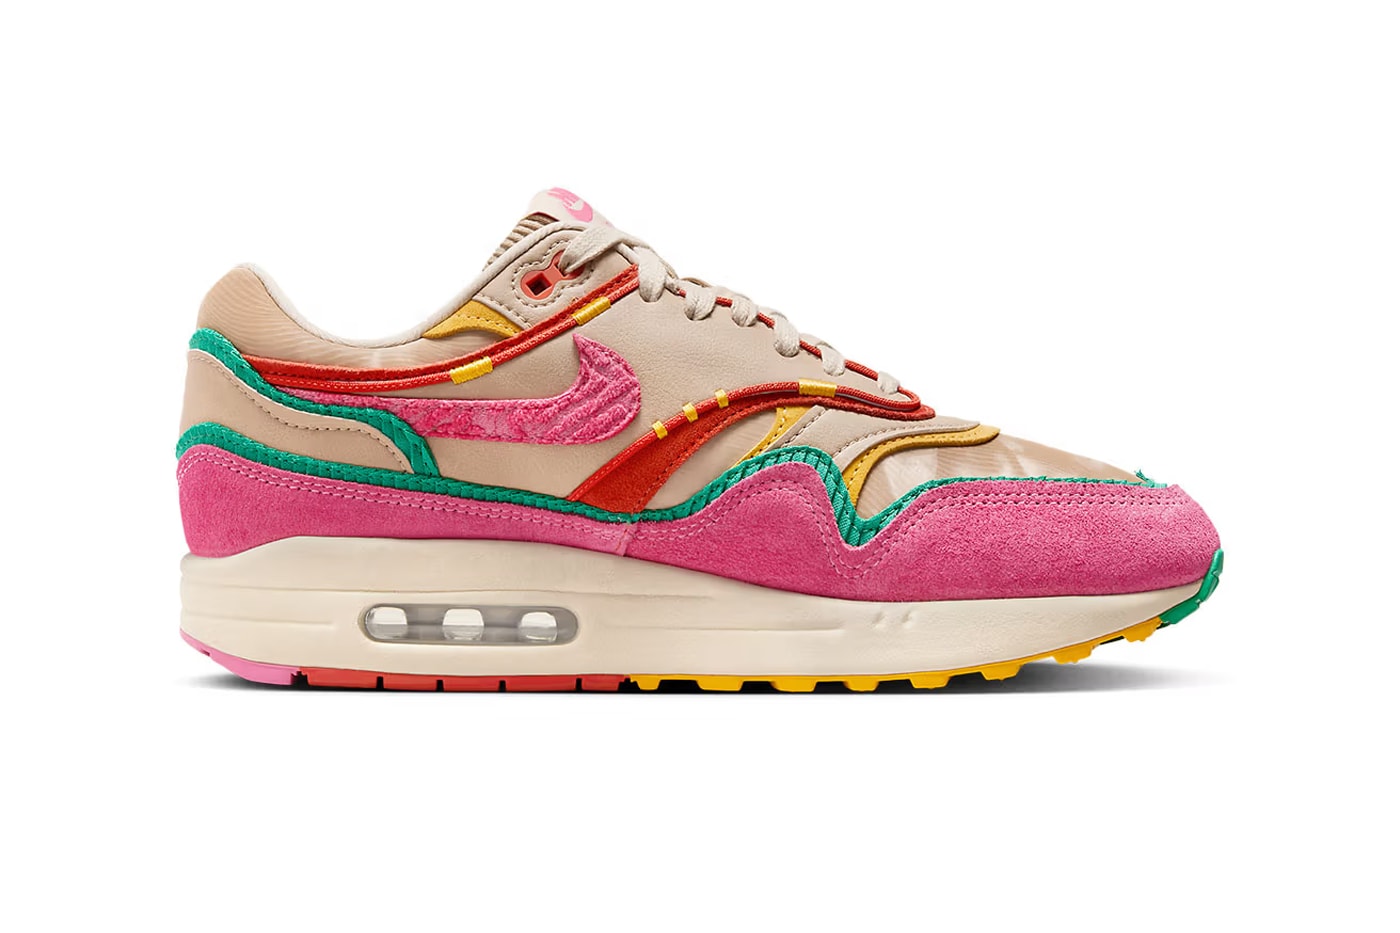 nike air max 1 latino heritage month FN0598 200 release date info store list buying guide photos price 